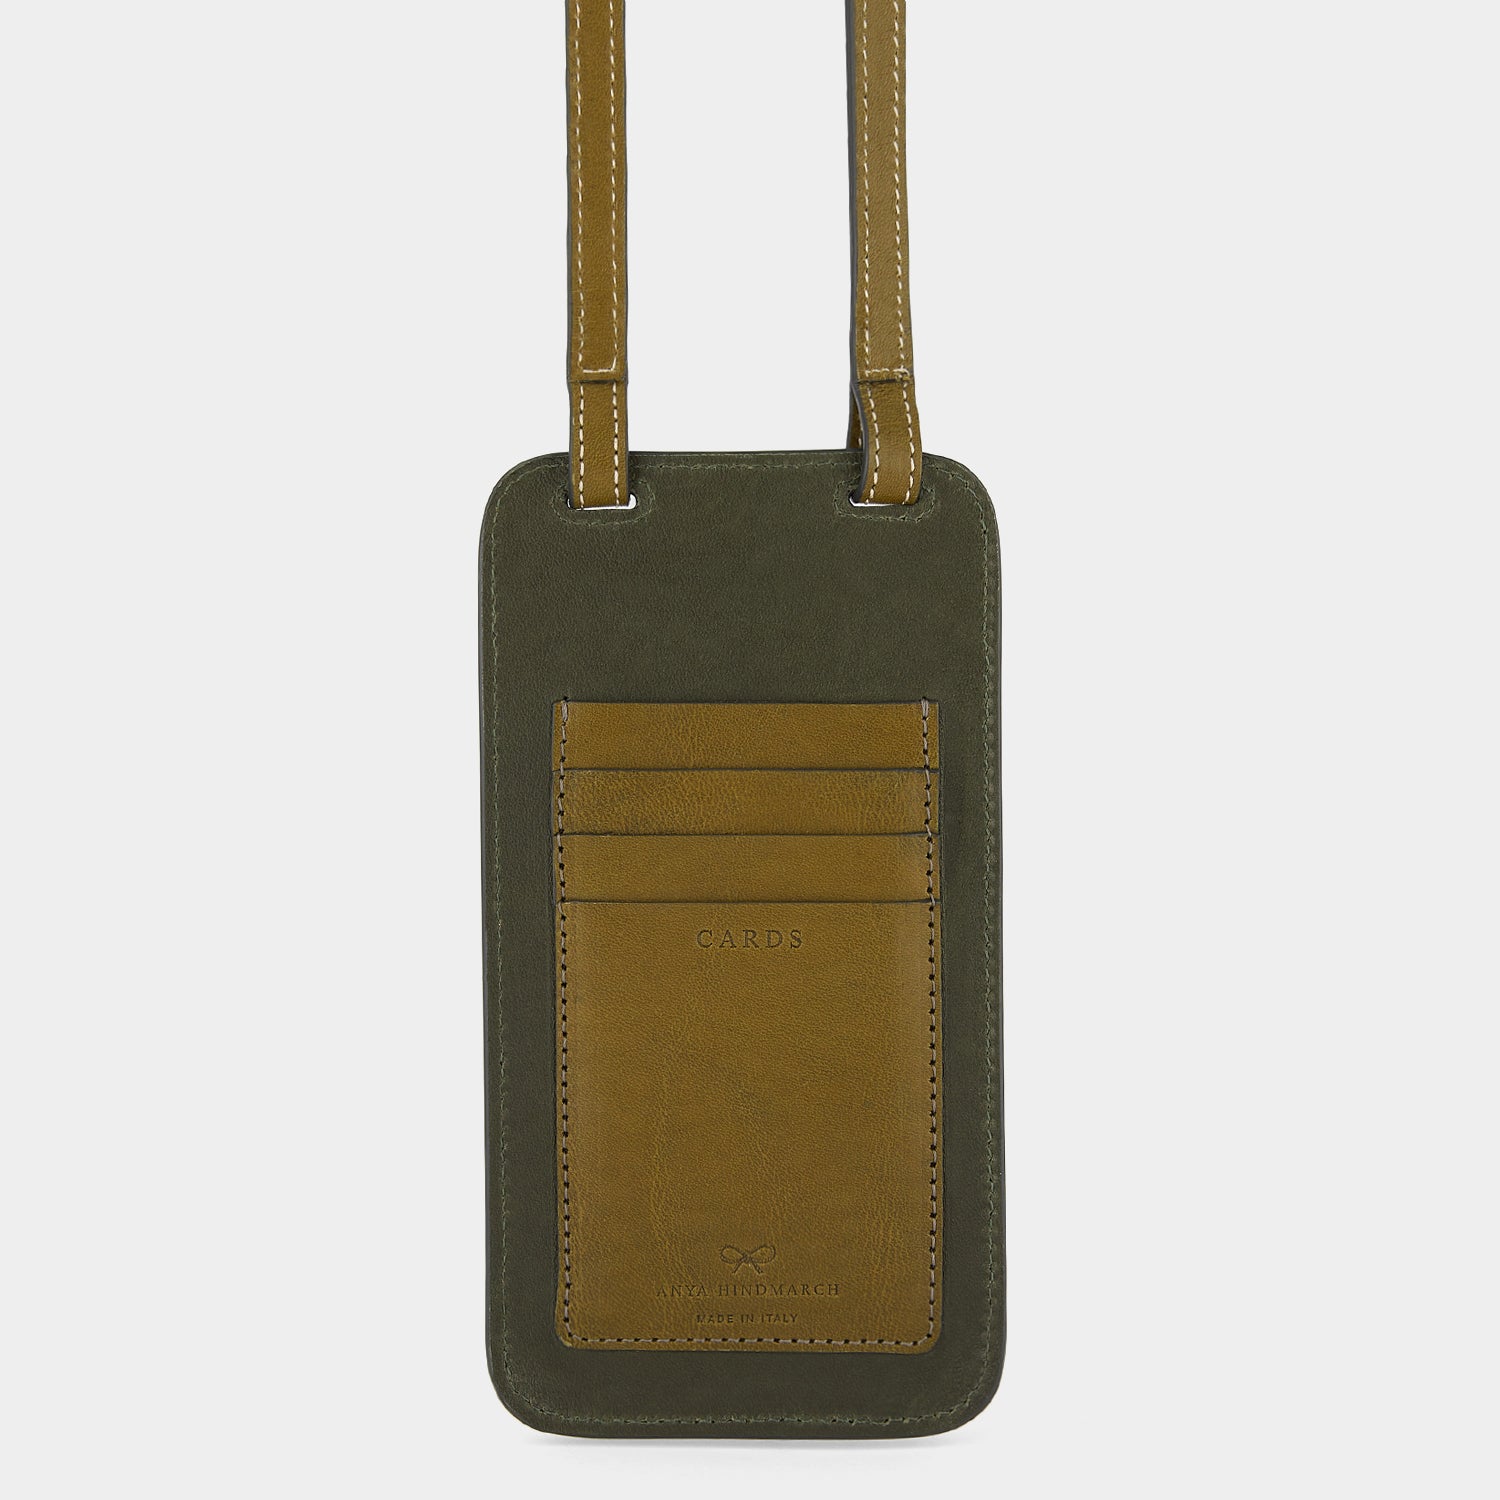 Return to Nature Phone Pouch on Strap -

                  
                    Compostable Leather in Dark Olive -
                  

                  Anya Hindmarch UK
